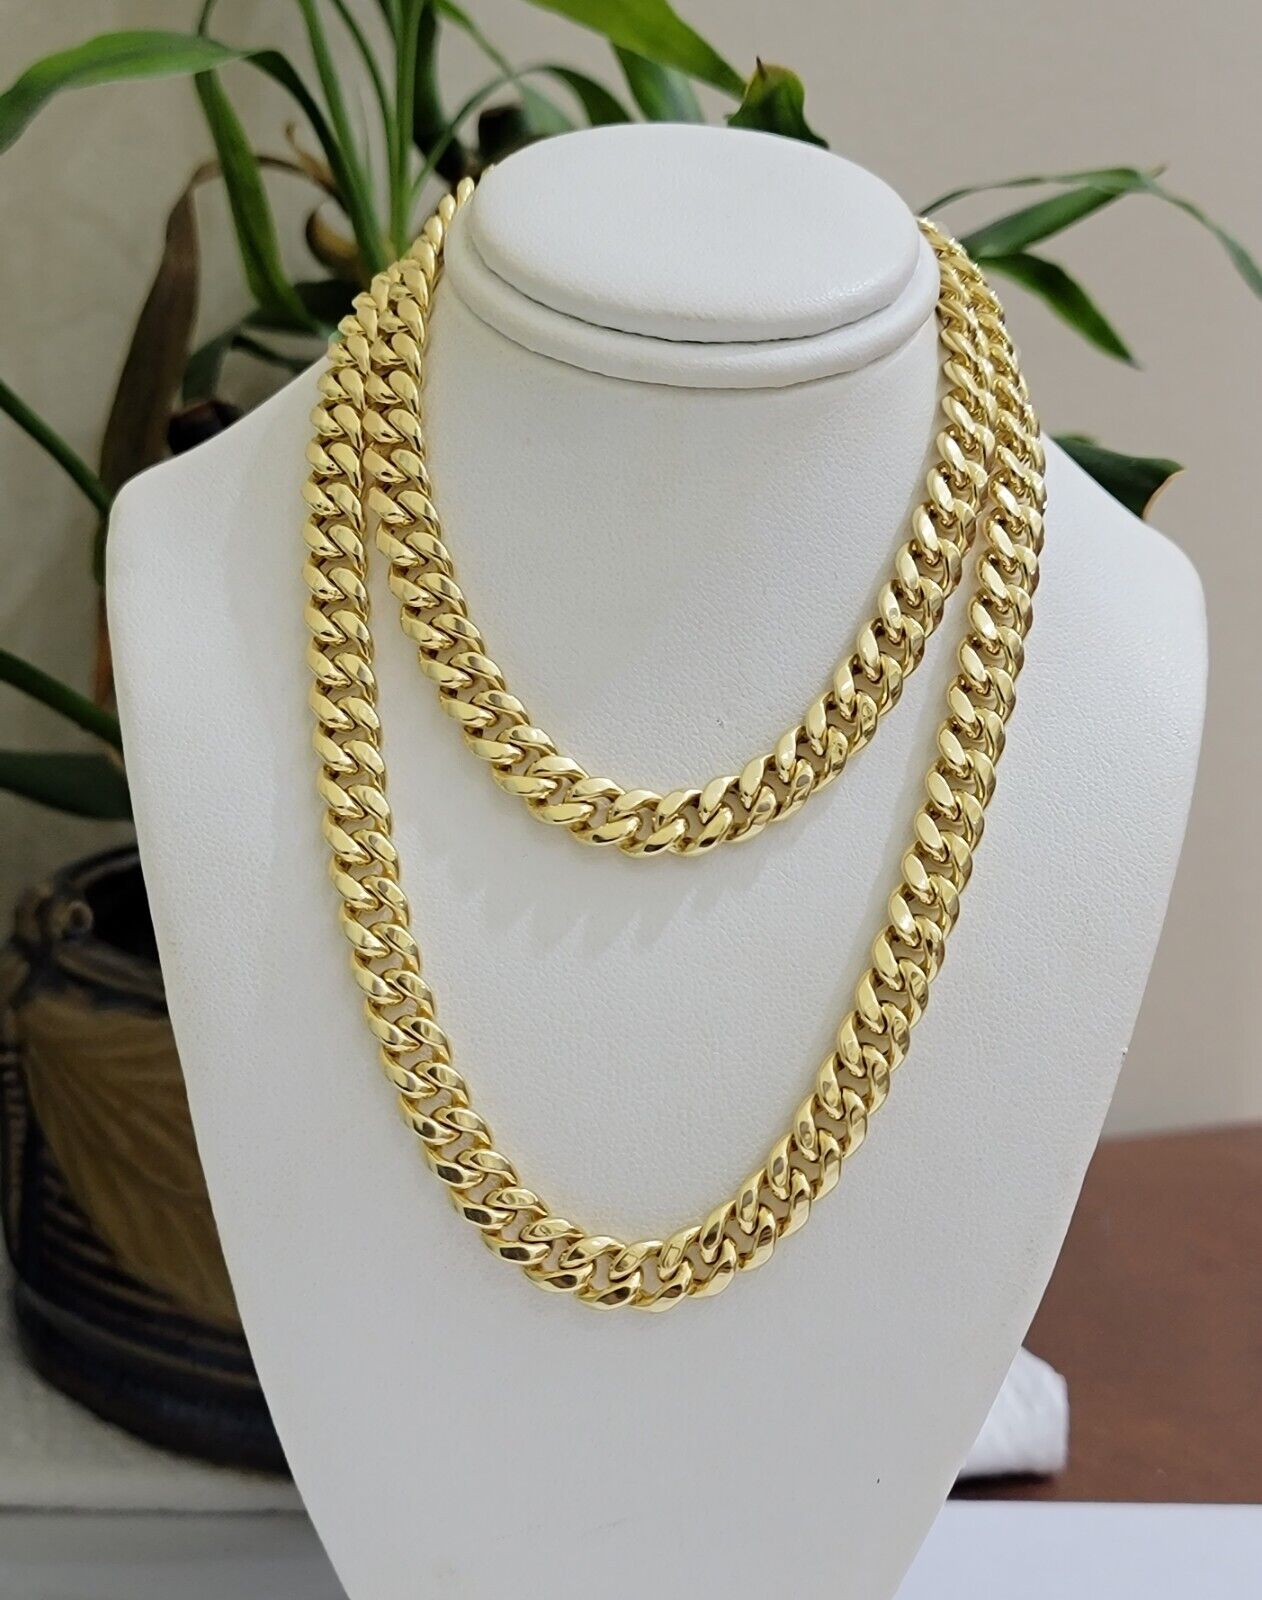 14k Yellow Gold Chain 18 Inch 8mm Miami Cuban Link  Men Women Necklace REAL 14KT